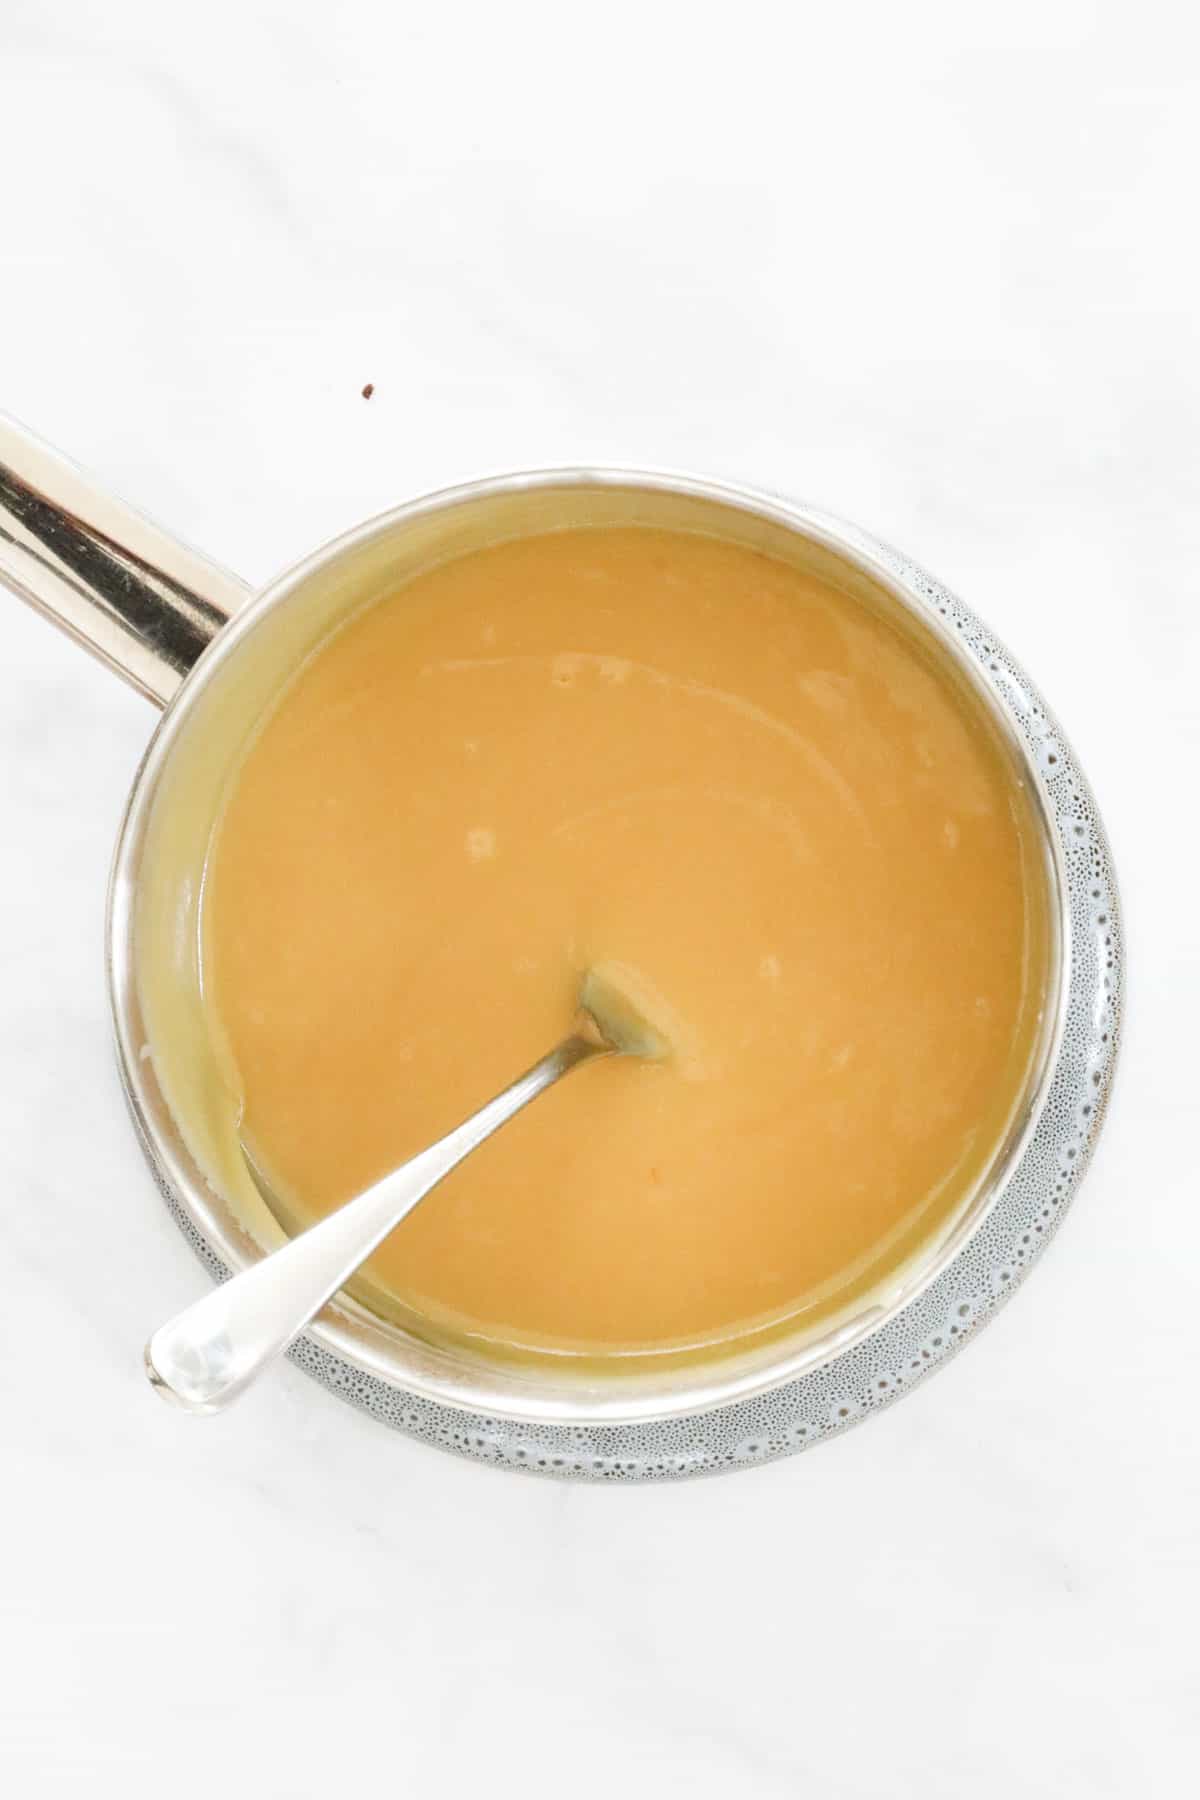 Melted butter mixed with condensed milk and golden syrup in a saucepan.